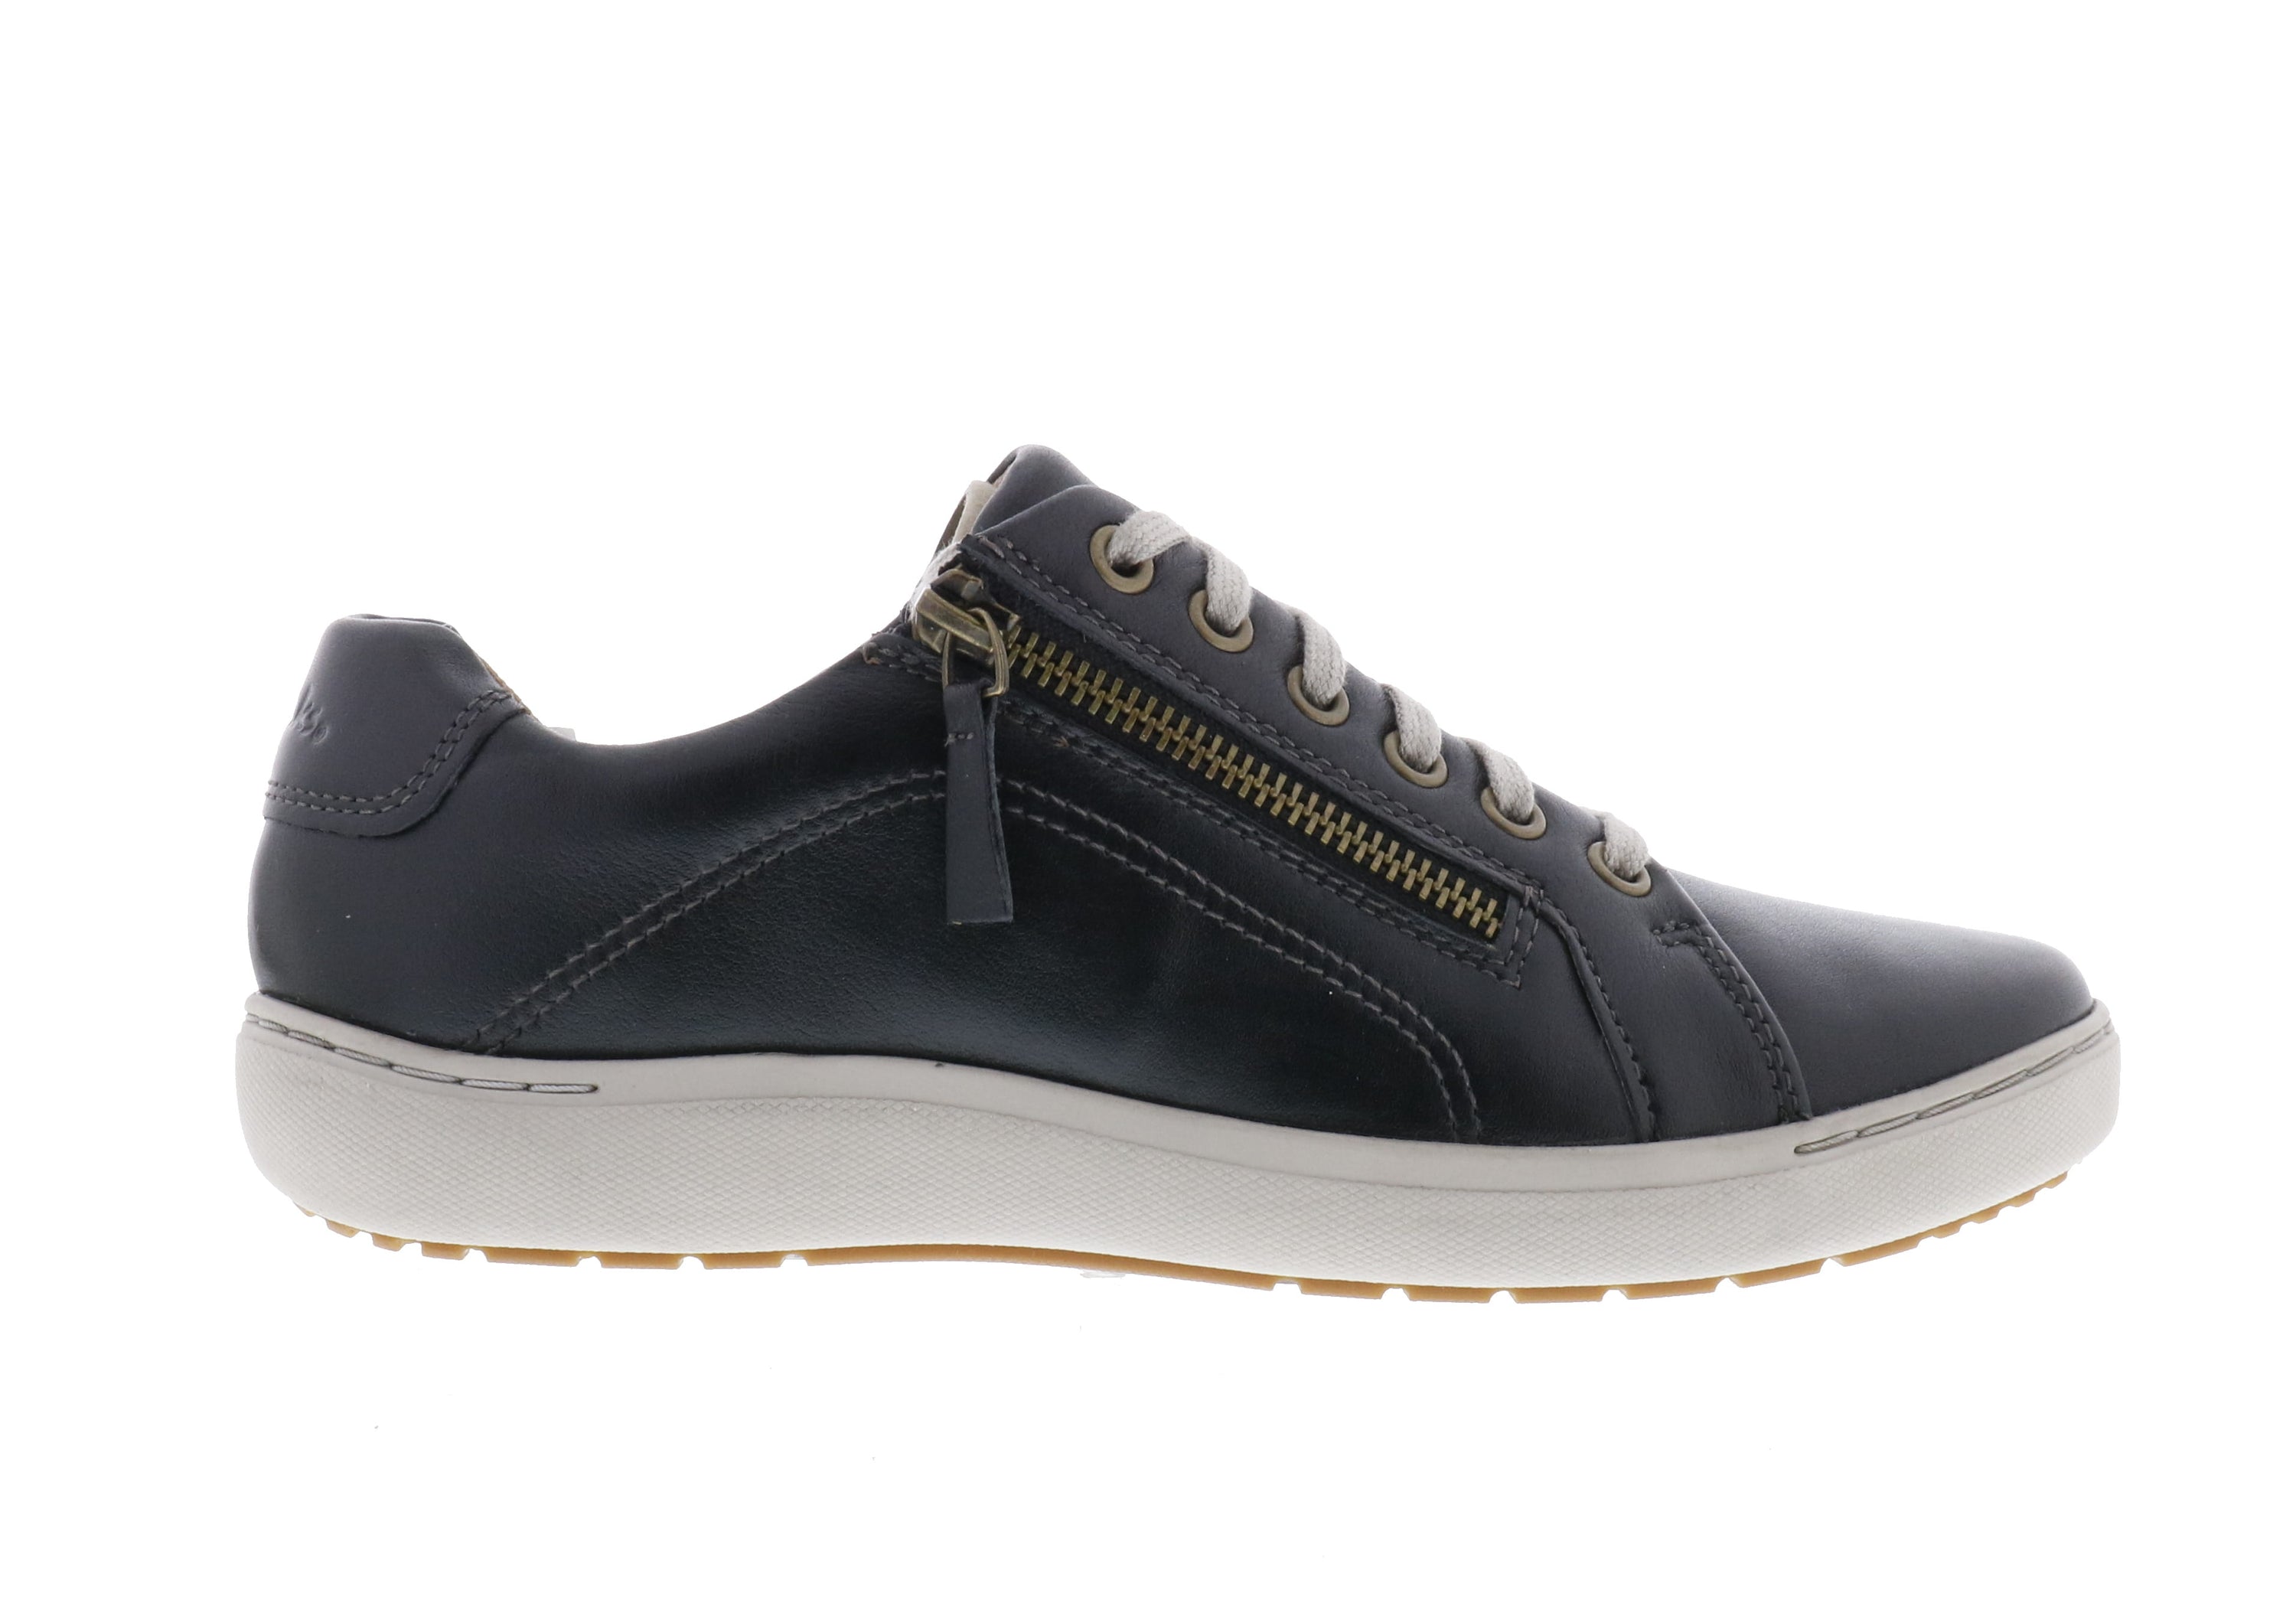 Clarks Nalle Lace (Women's) - Black Leather